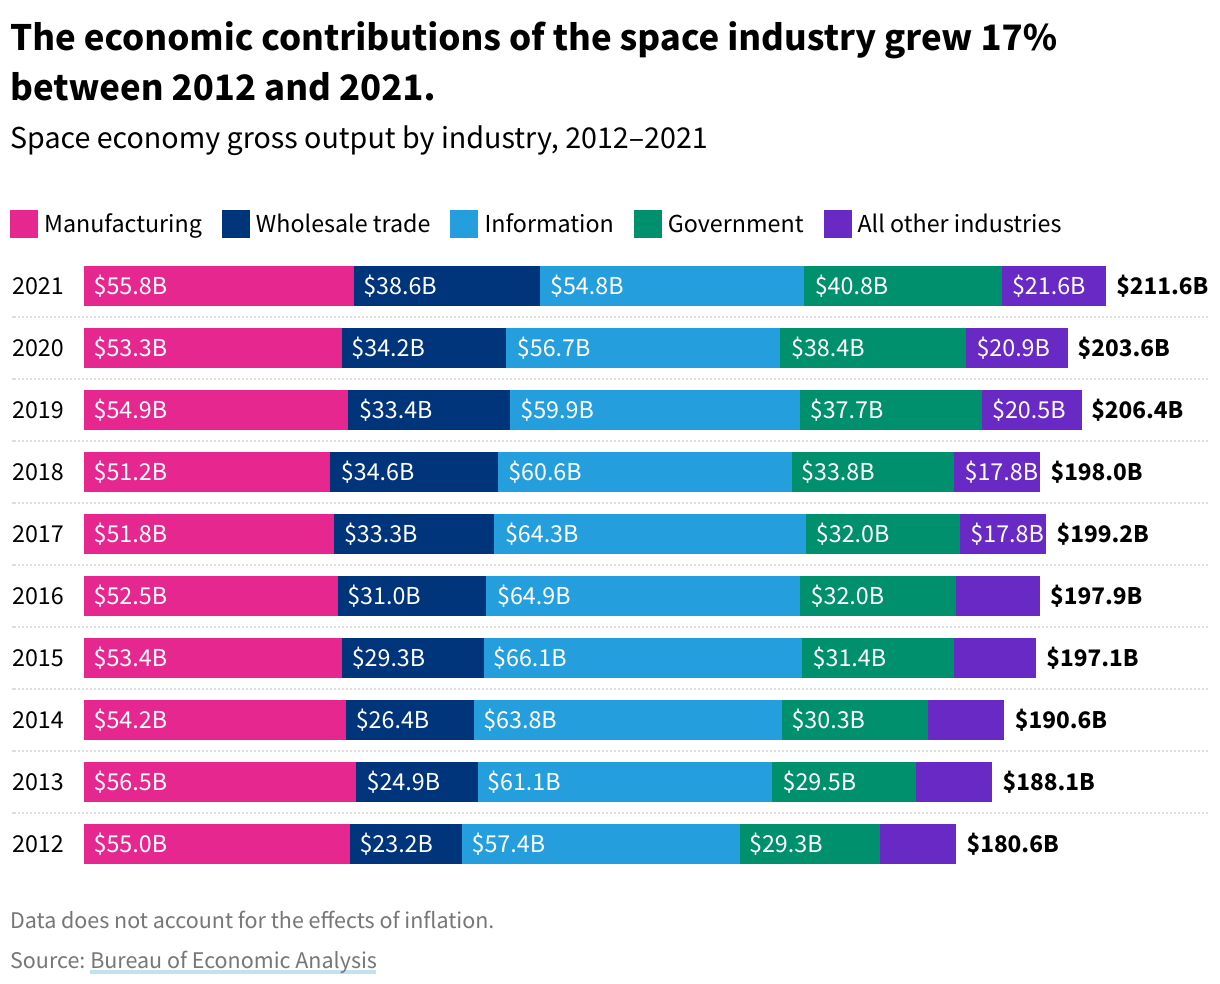 Horizontal bar chart showing gross output by industry of the American space economy from 2012-2021. The economic contributions of the space industry grew 17% between 2012 and 2021.